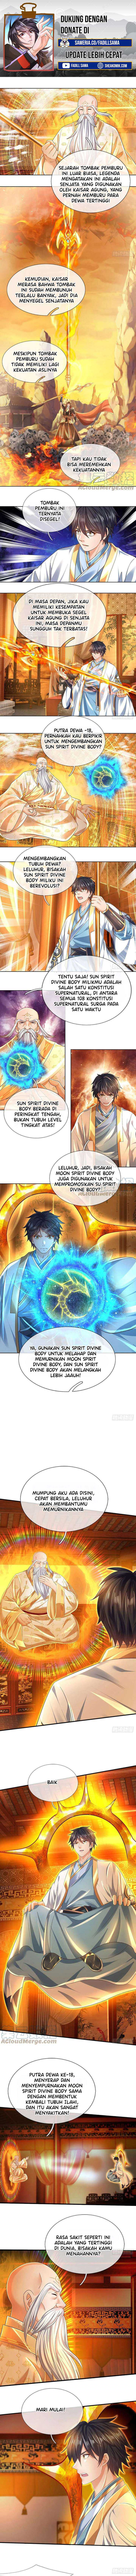 Star Sign In To Supreme Dantian Chapter 156